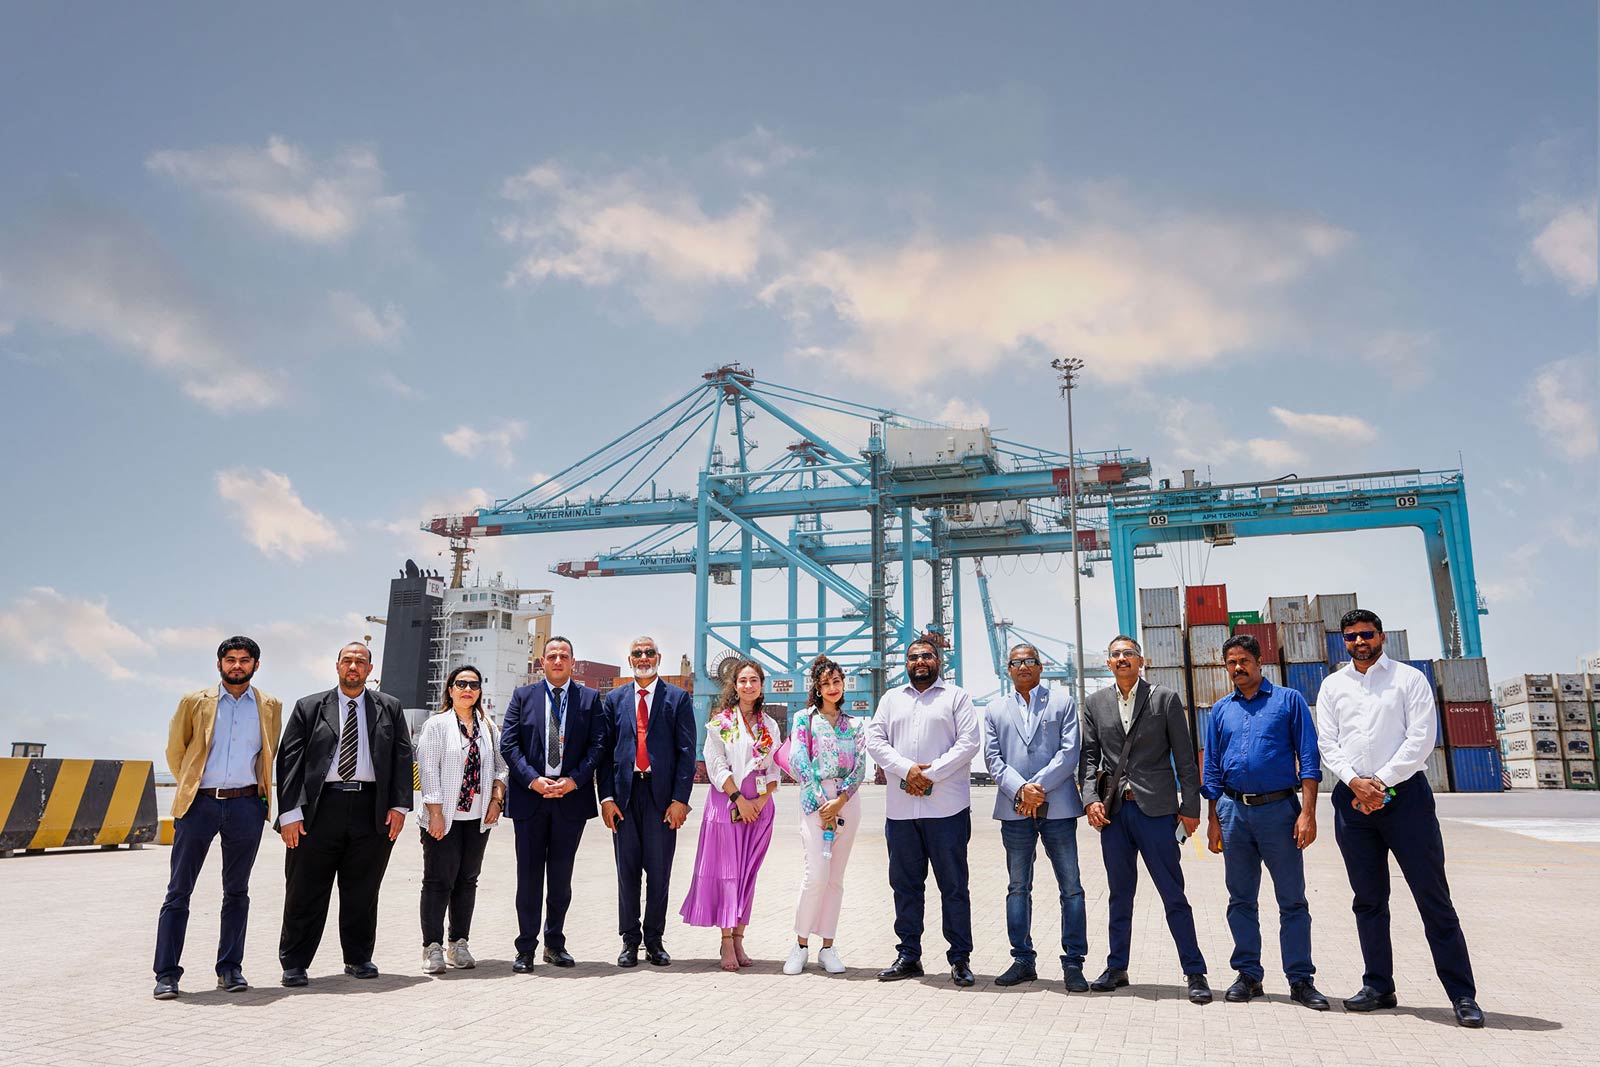 Terminal to become region’s first fully solar energy-powered seaport – EQ Mag